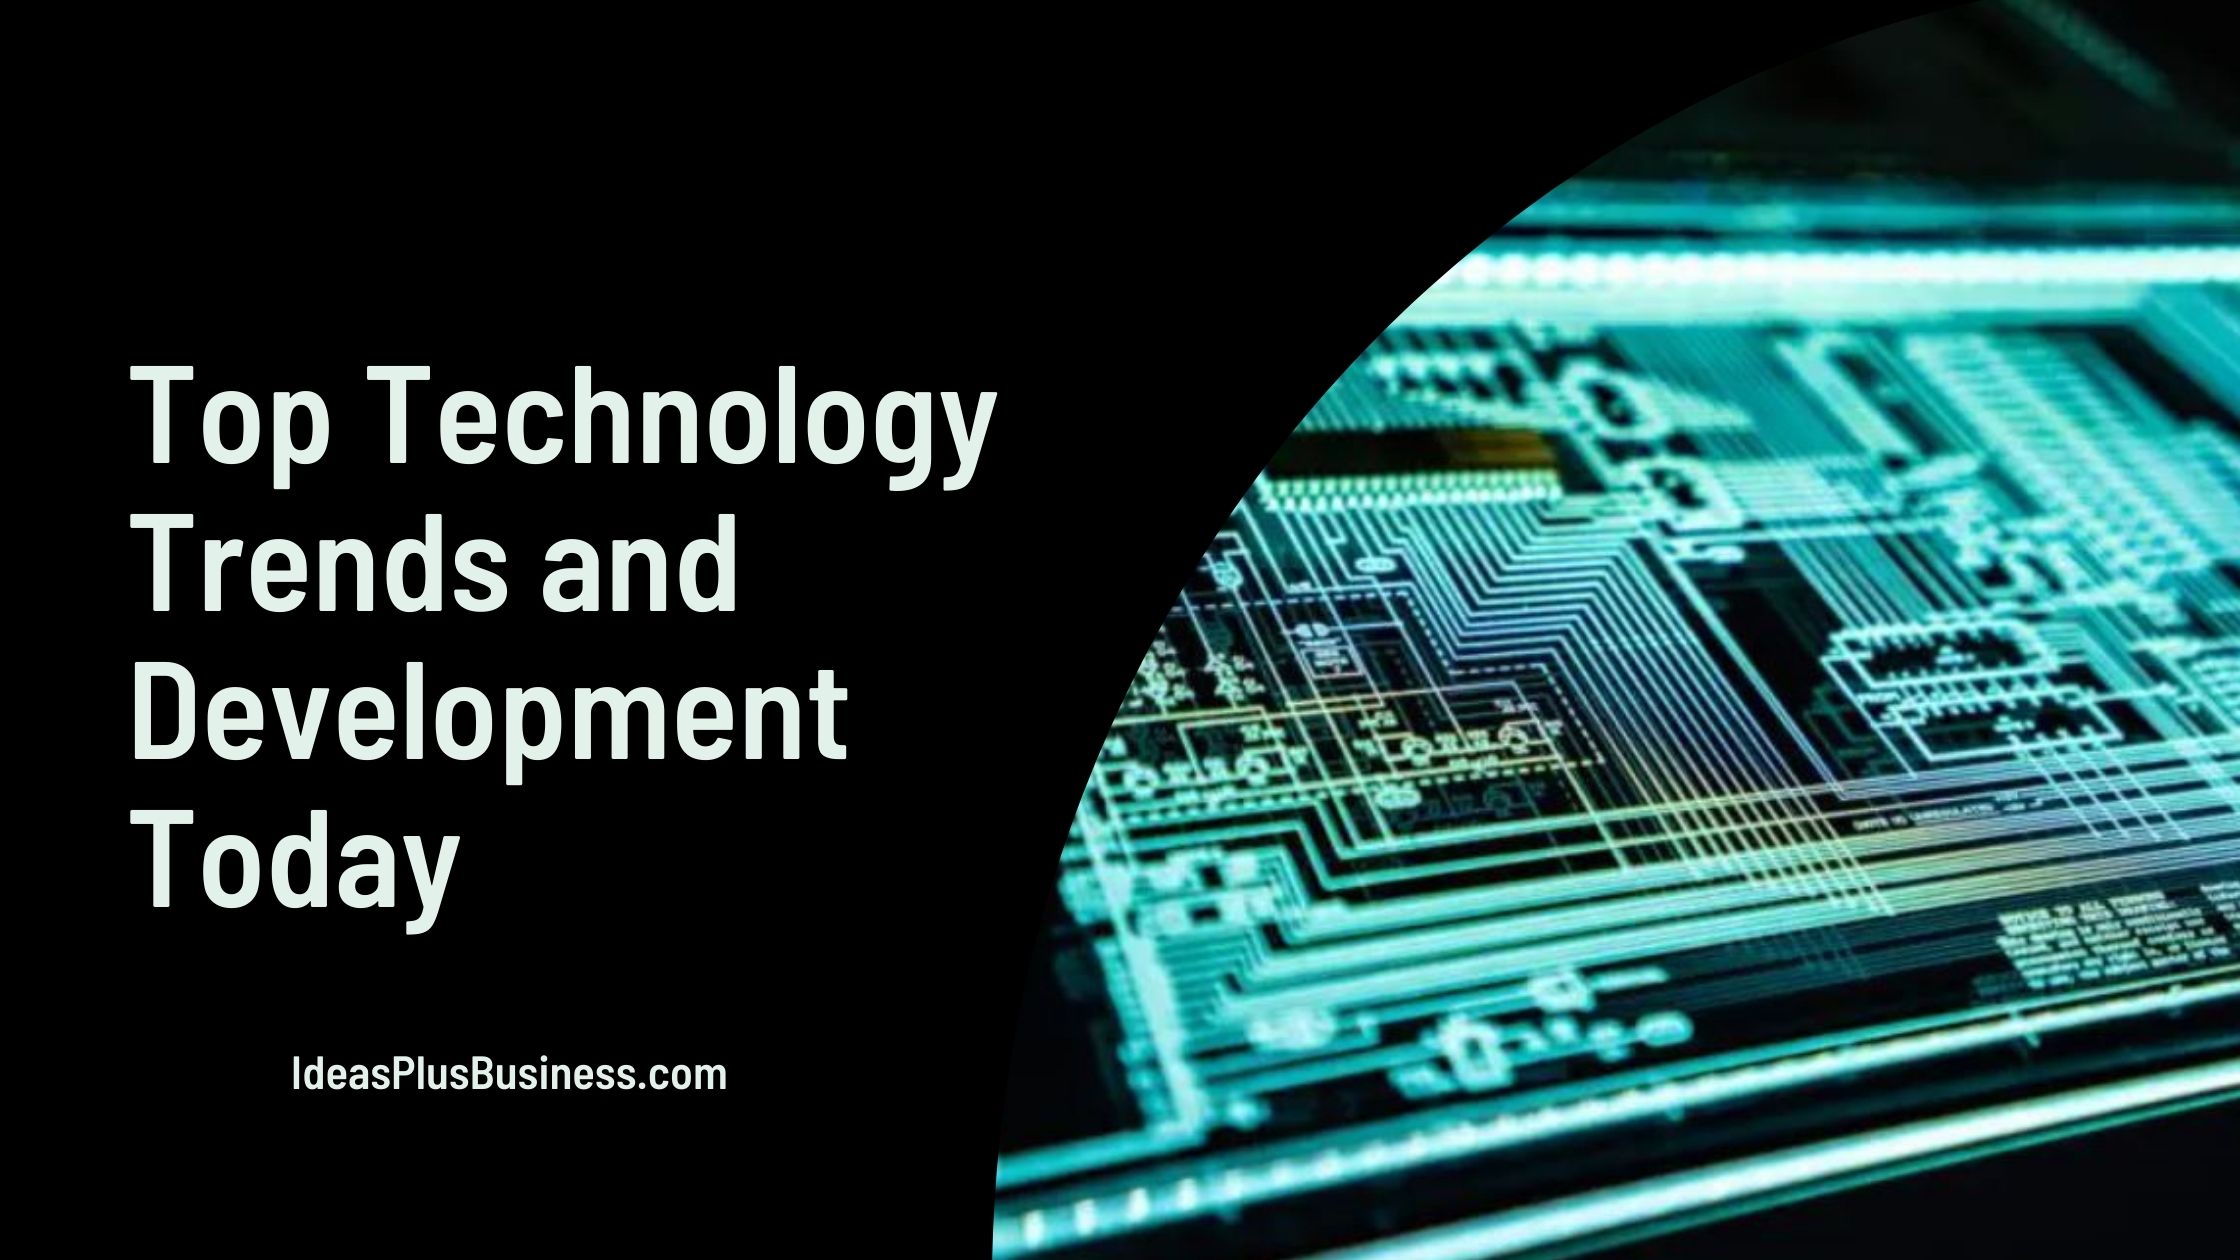 7 Top Technology Trends and Development Today